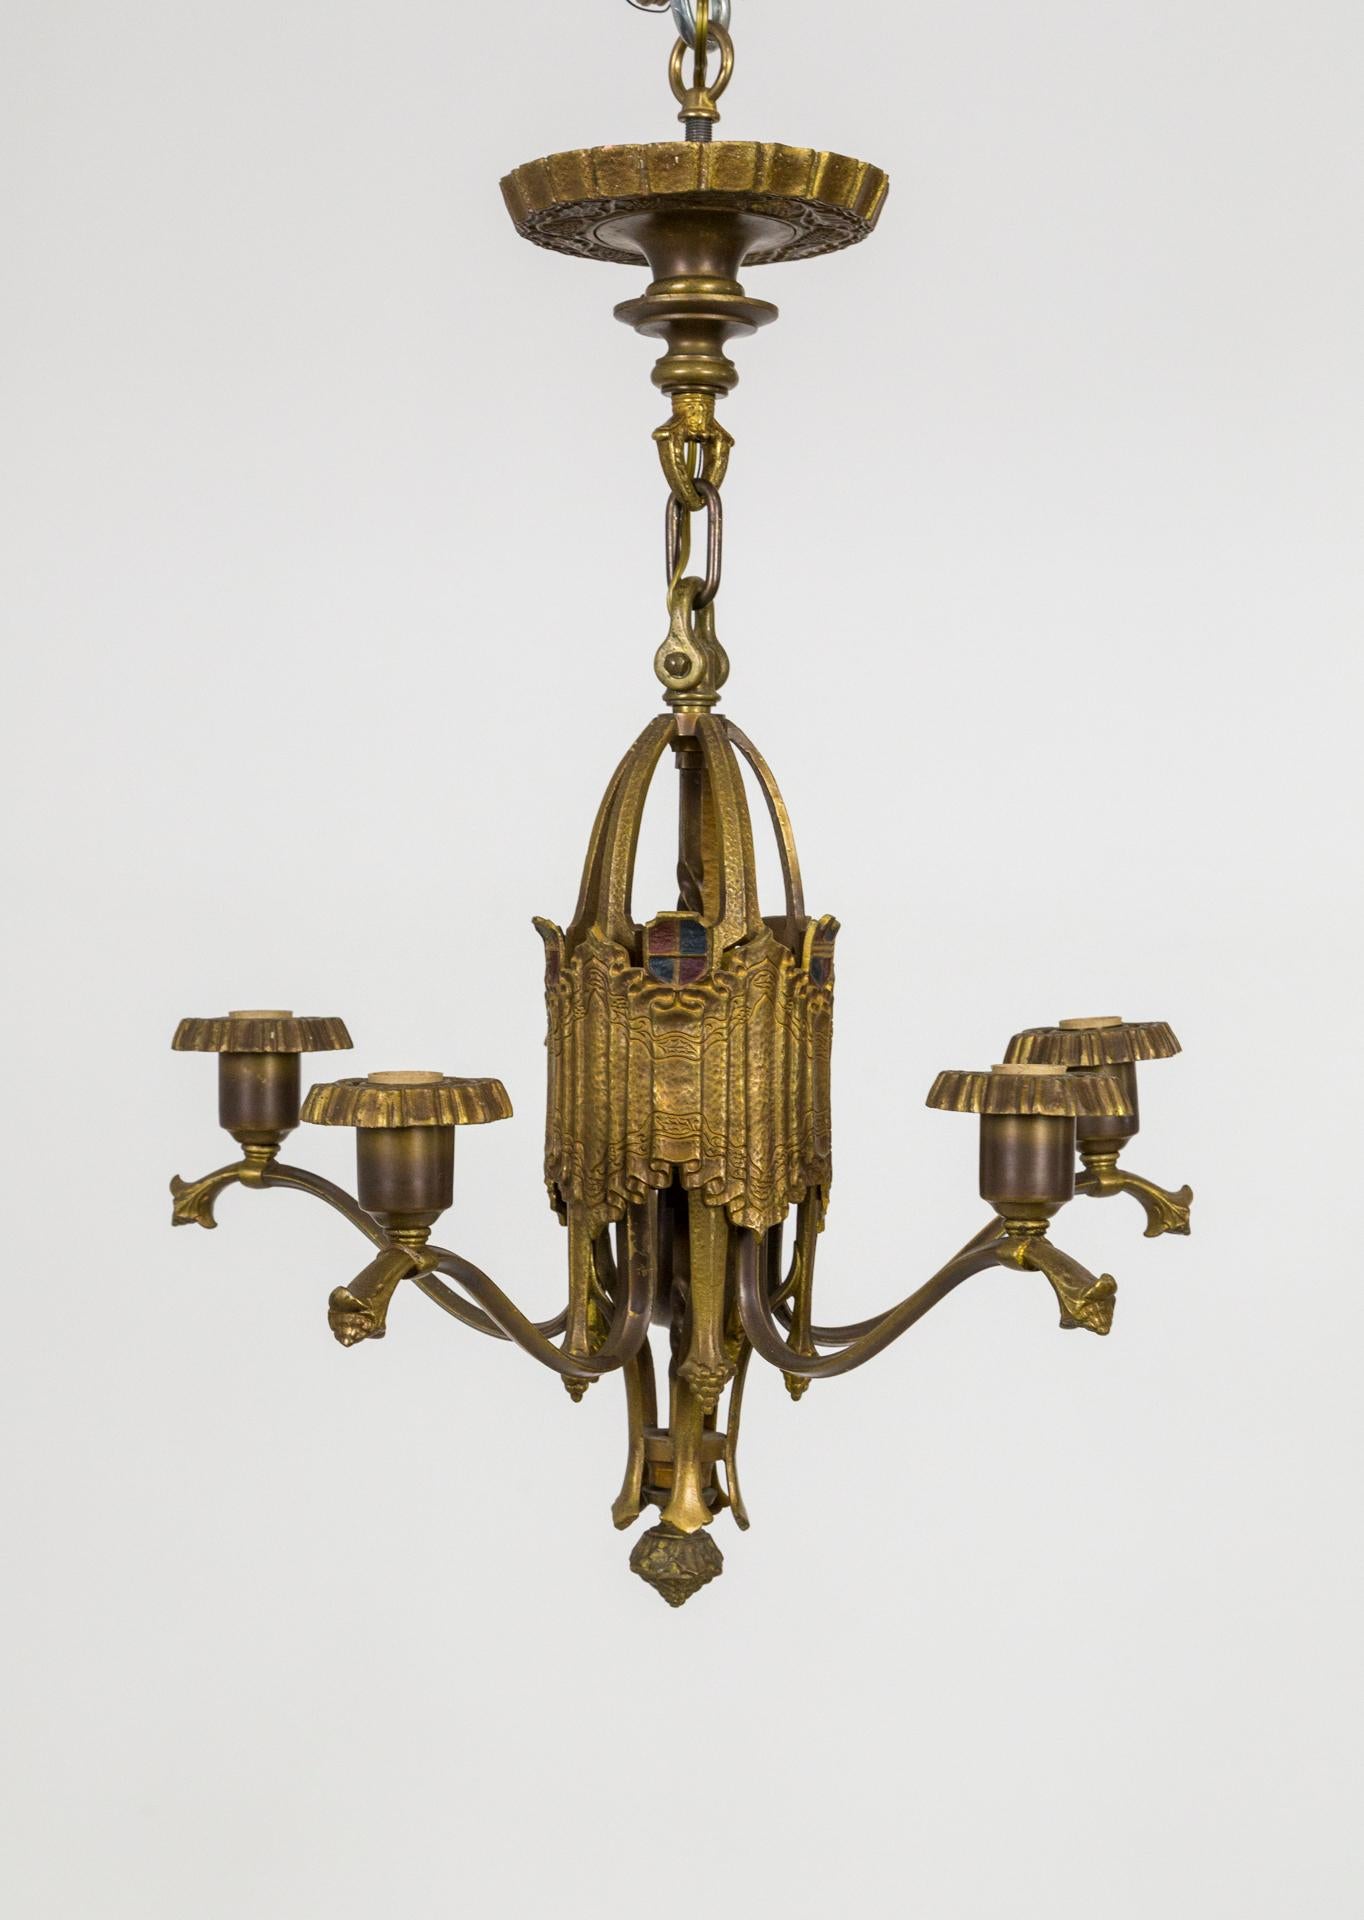 A Turn of the Century brass, brass, 5-light chandelier; original from the entry of a San Francisco Victorian home and newly refurbished. It has an Art Nouveau and Renaissance Revival look with a body of cast, folded fabric, grape accents, and a